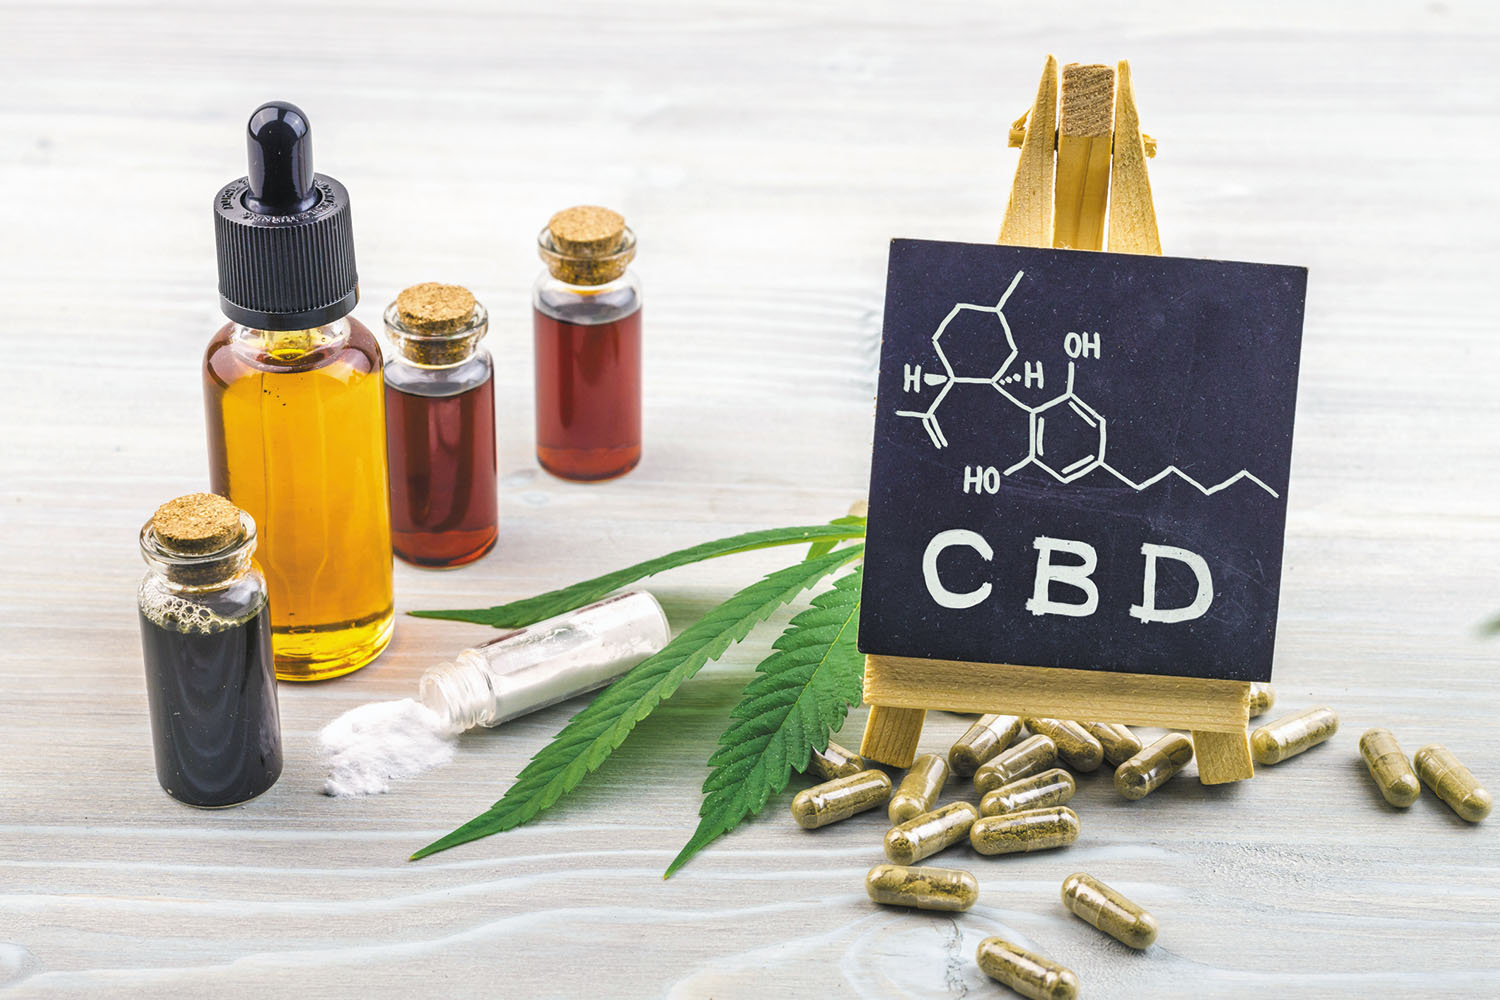 CBD products are everywhere. But do they work? - Harvard Health